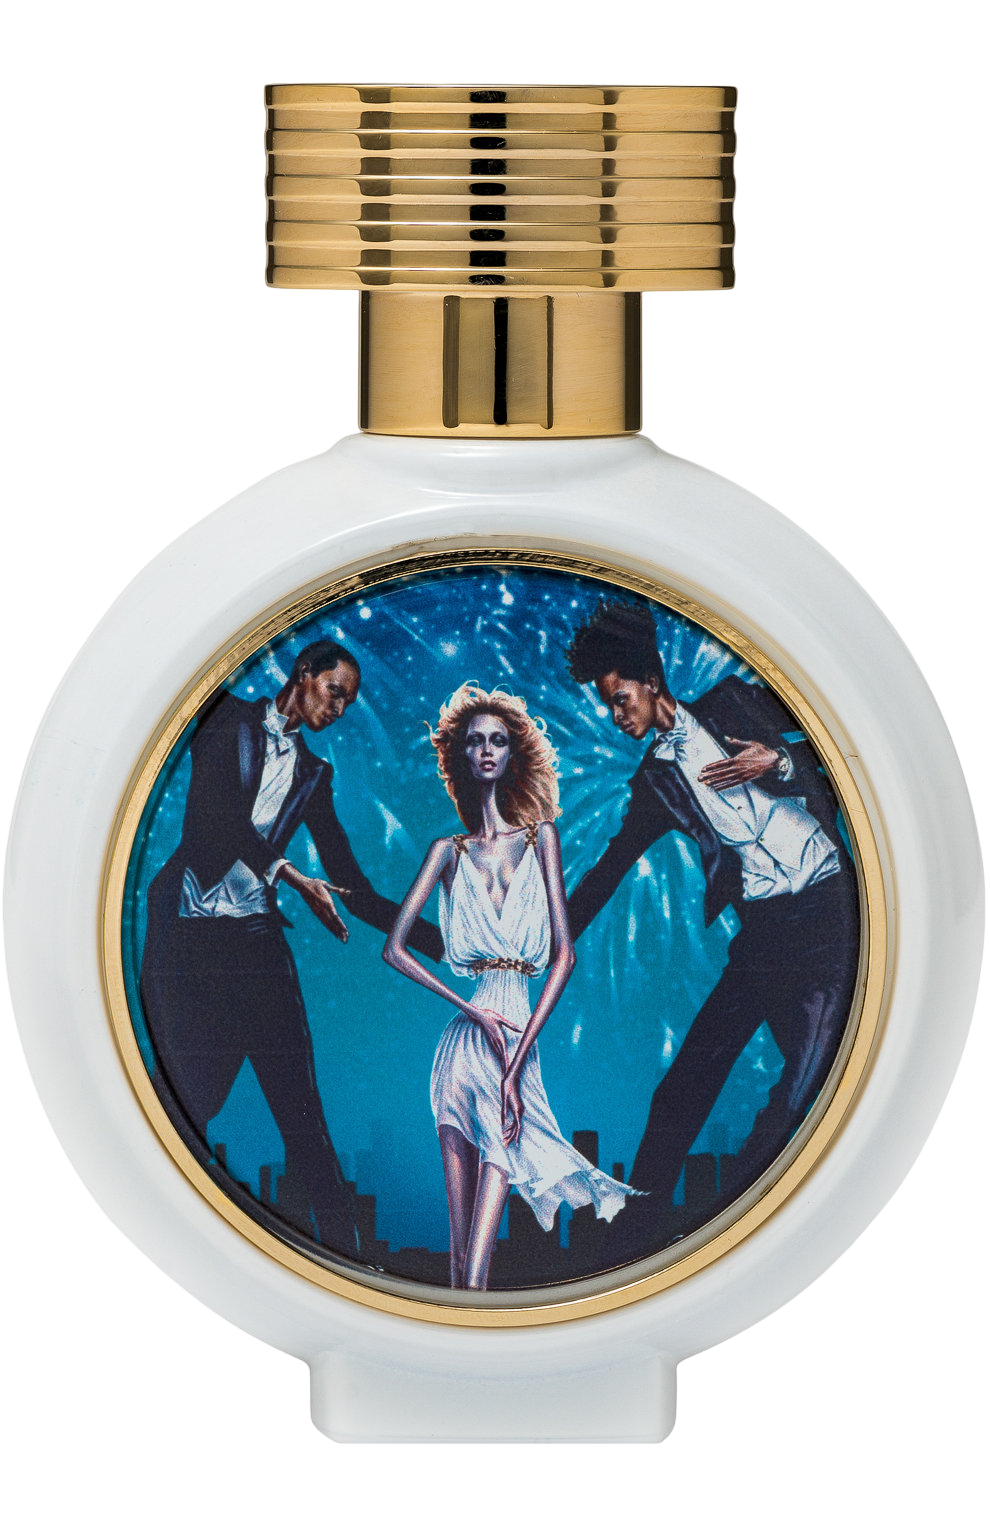 Hfc everywhere wear. Духи HFC delicious Kisses. Haute Fragrance Company Devil's intrigue парфюмерная вода 75мл. Haute Fragrance Company 75 мл. Haute Fragrance Company HFC Dancing Queen (жен) EDP 75ml (тестер).